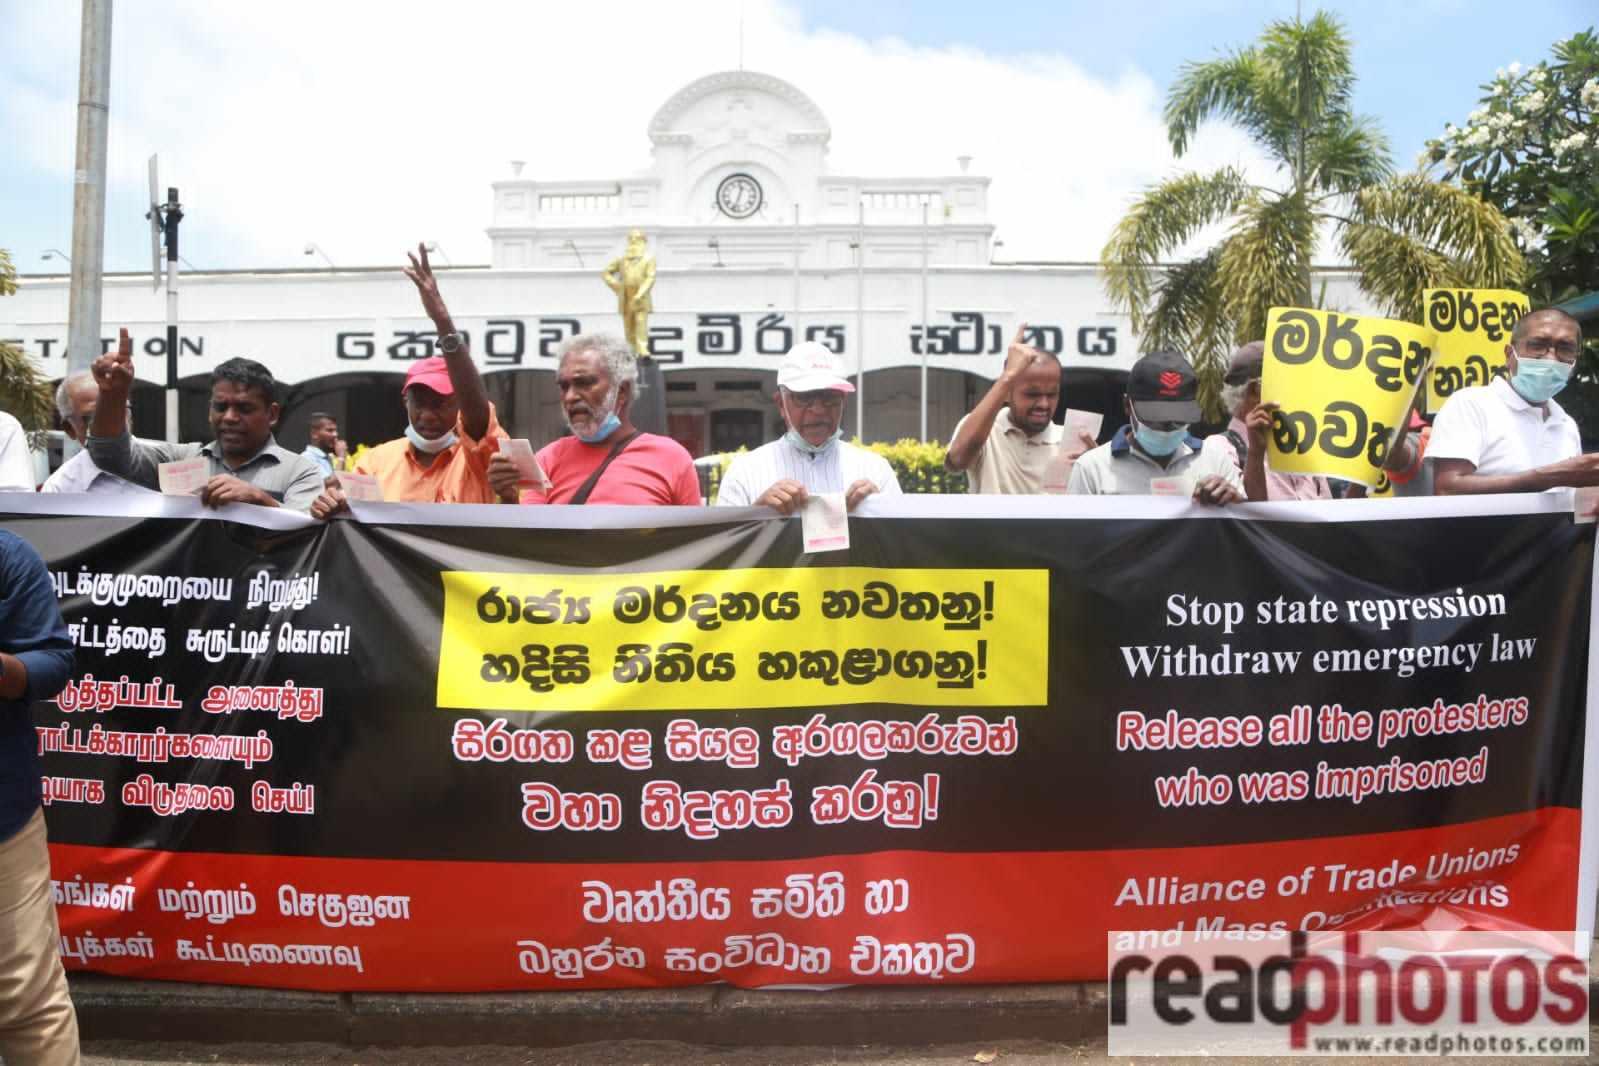 protest held in colombo fort by alliance of trade union and mass organizations - Read Photos